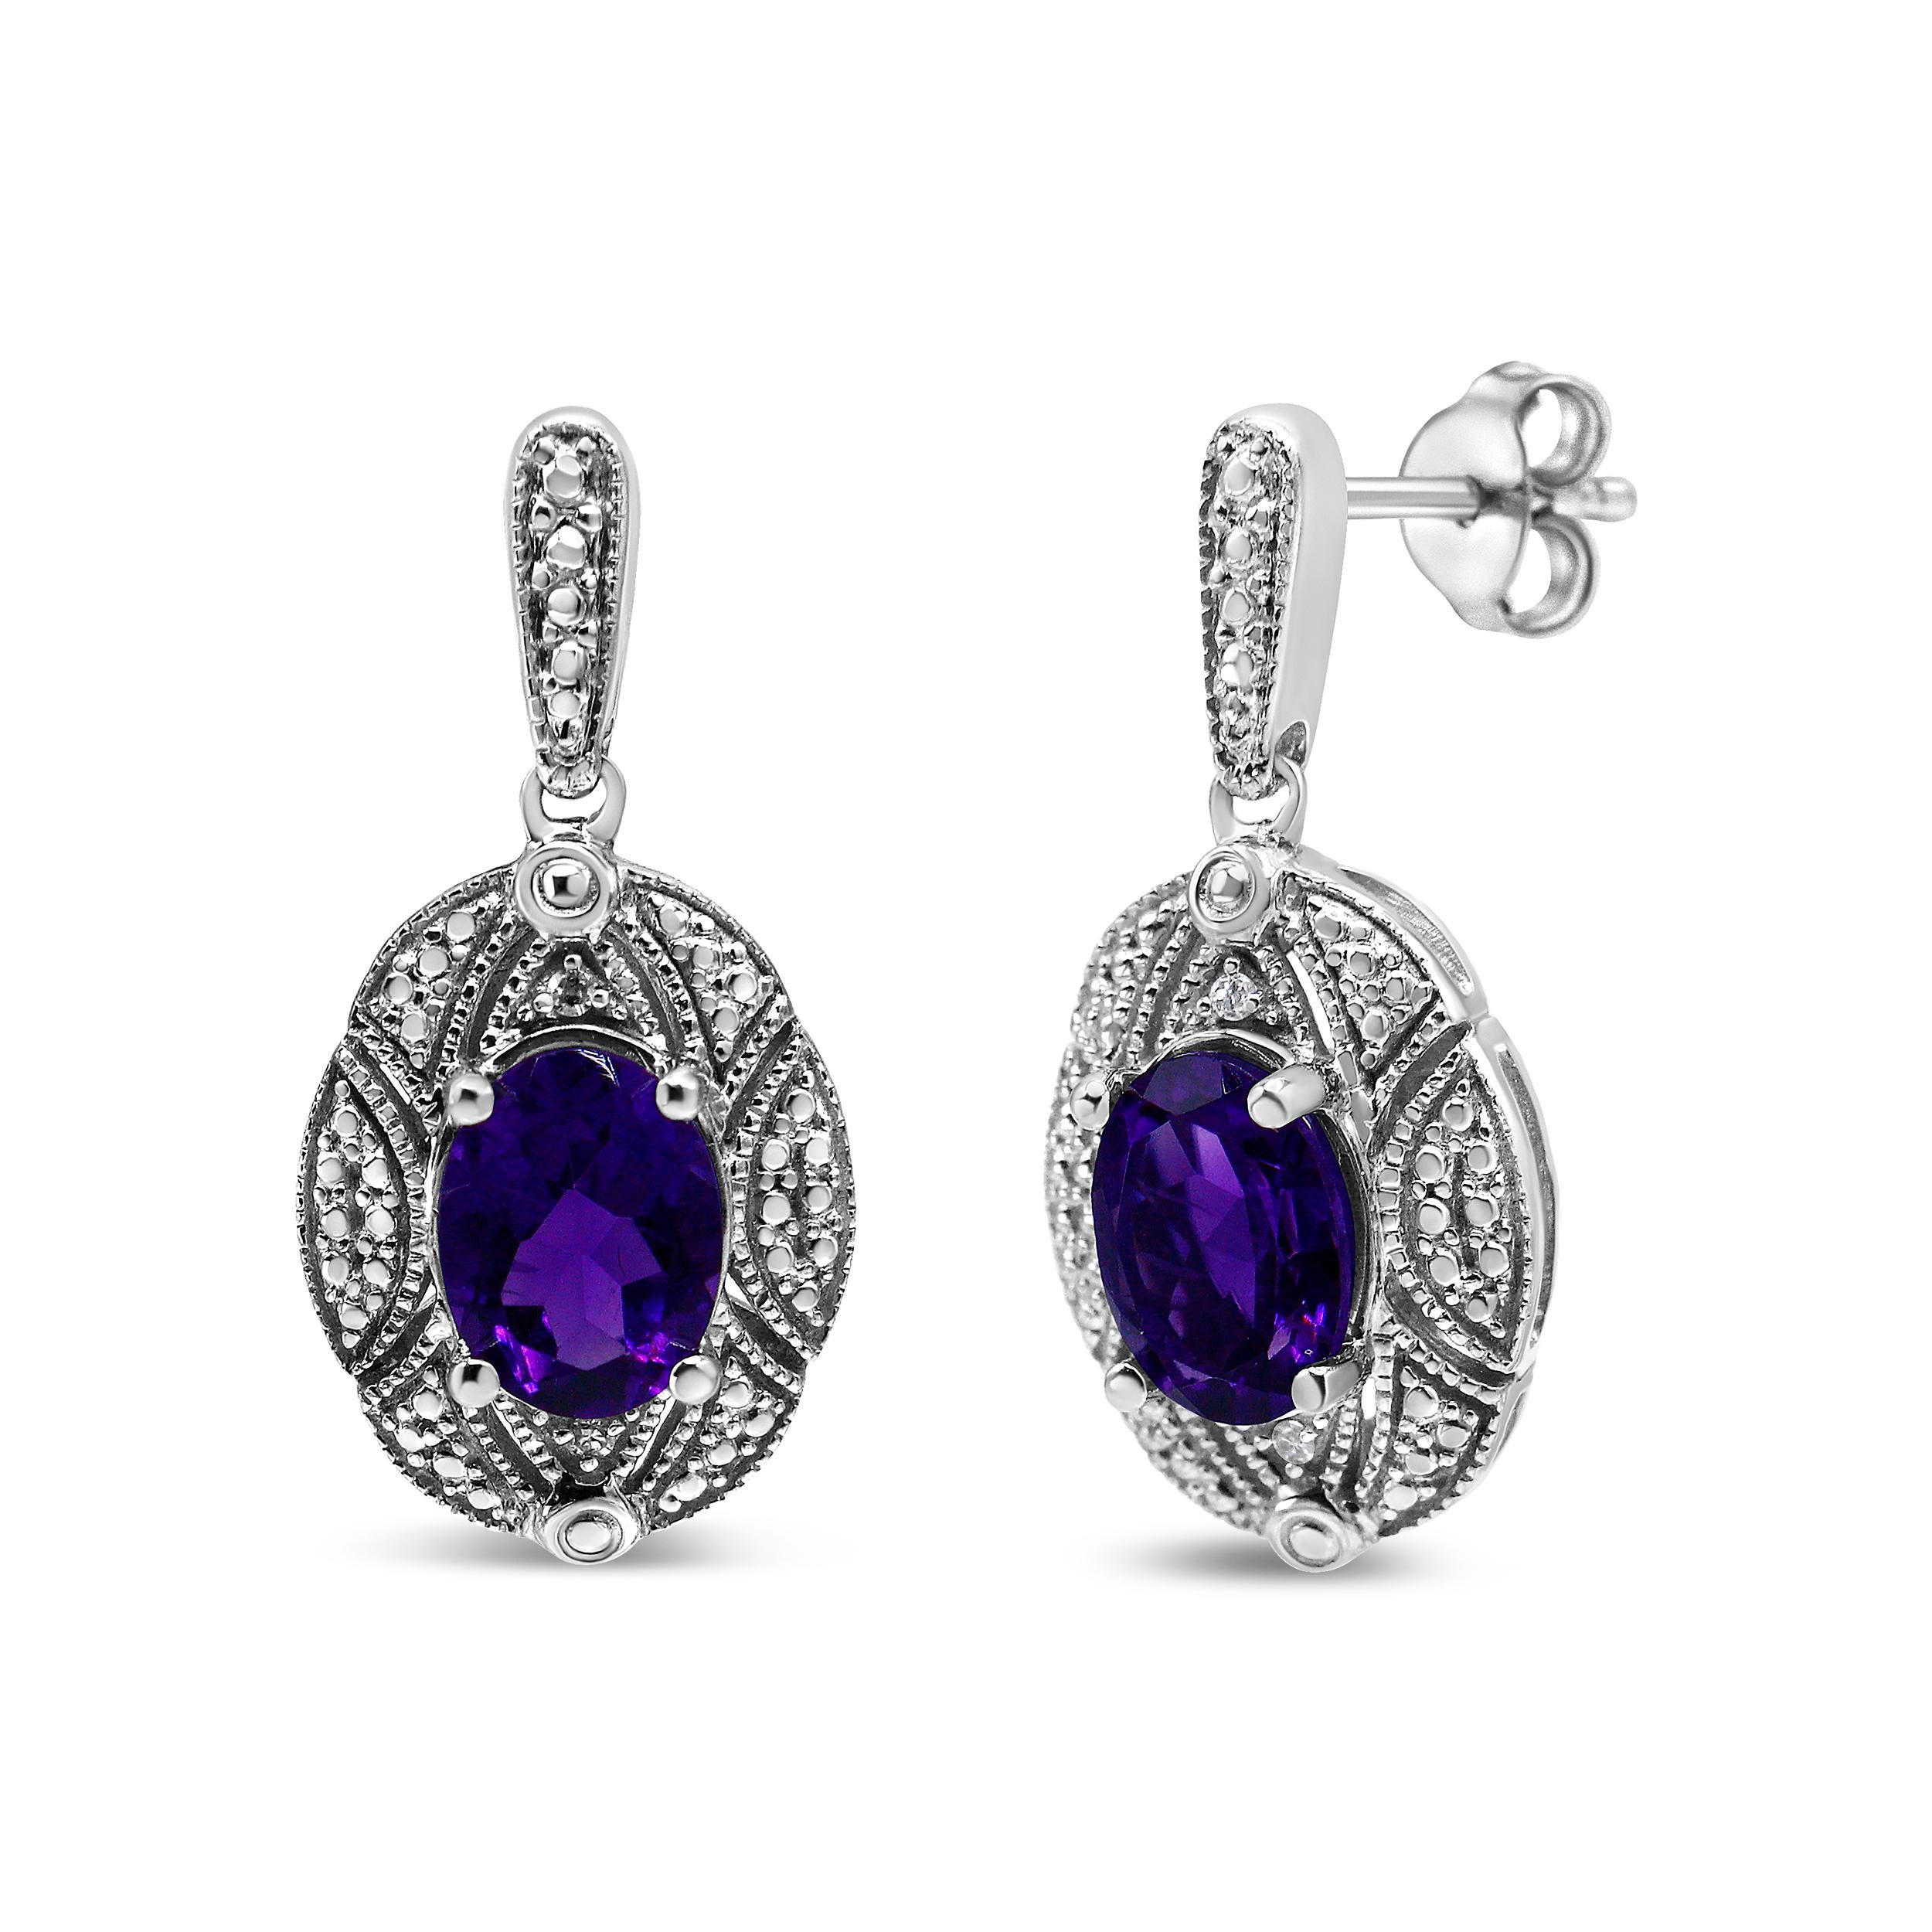 These elegant diamond accent and gemstone stud earrings boast a glorious sense of style! Set in .925 sterling silver, a 8*6mm oval-cut amethyst gemstone in purple glows against a halo of intricate milgrain detailing and round-cut white accent